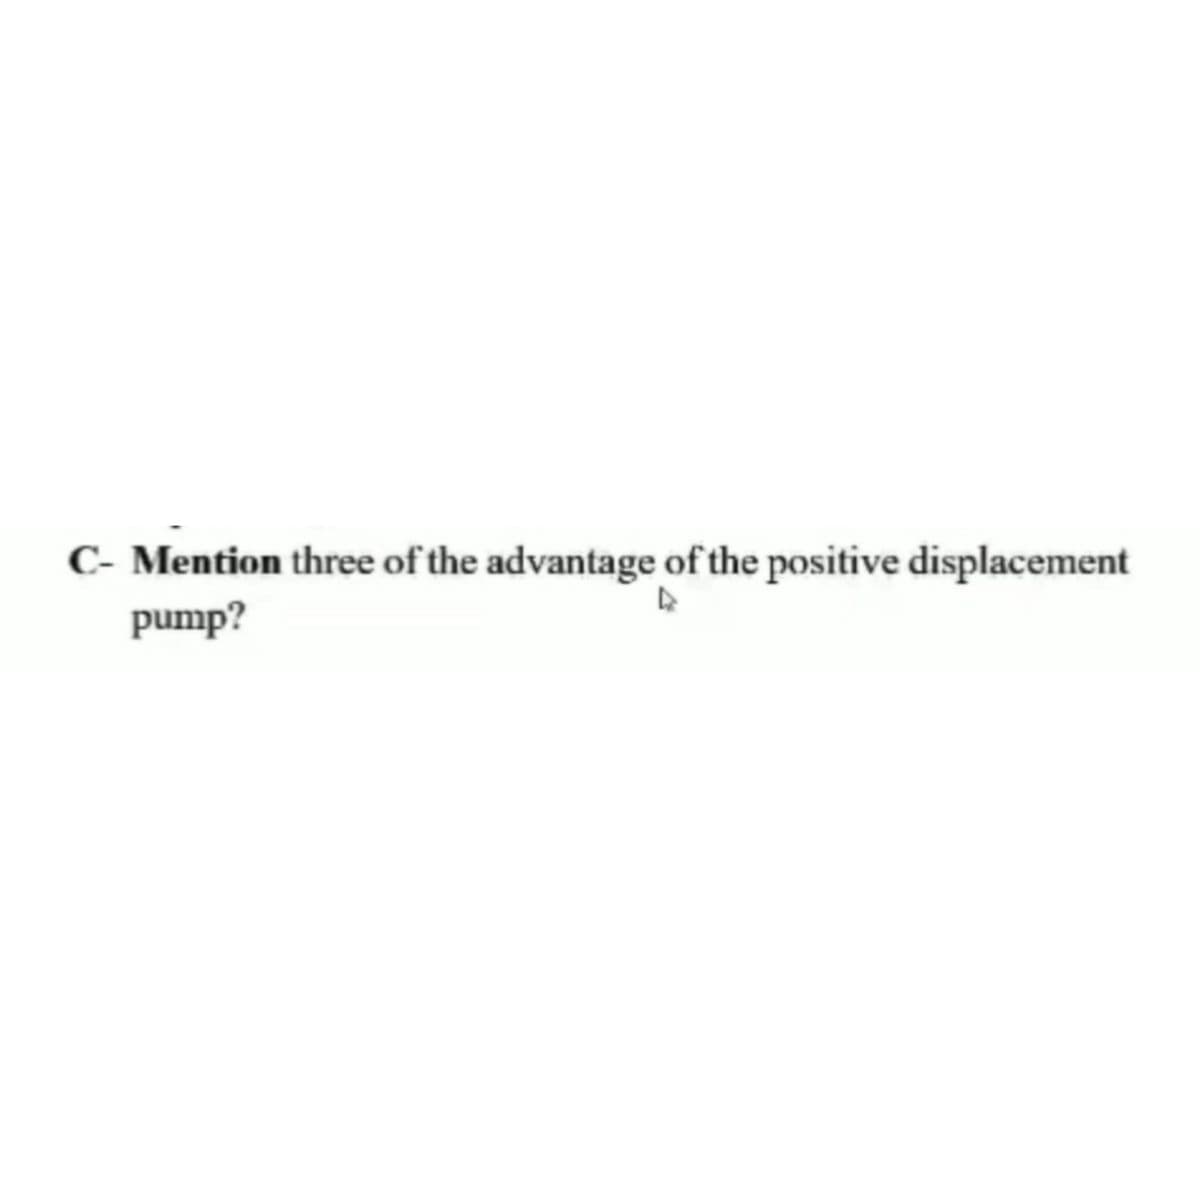 C- Mention three of the advantage of the positive displacement
pump?